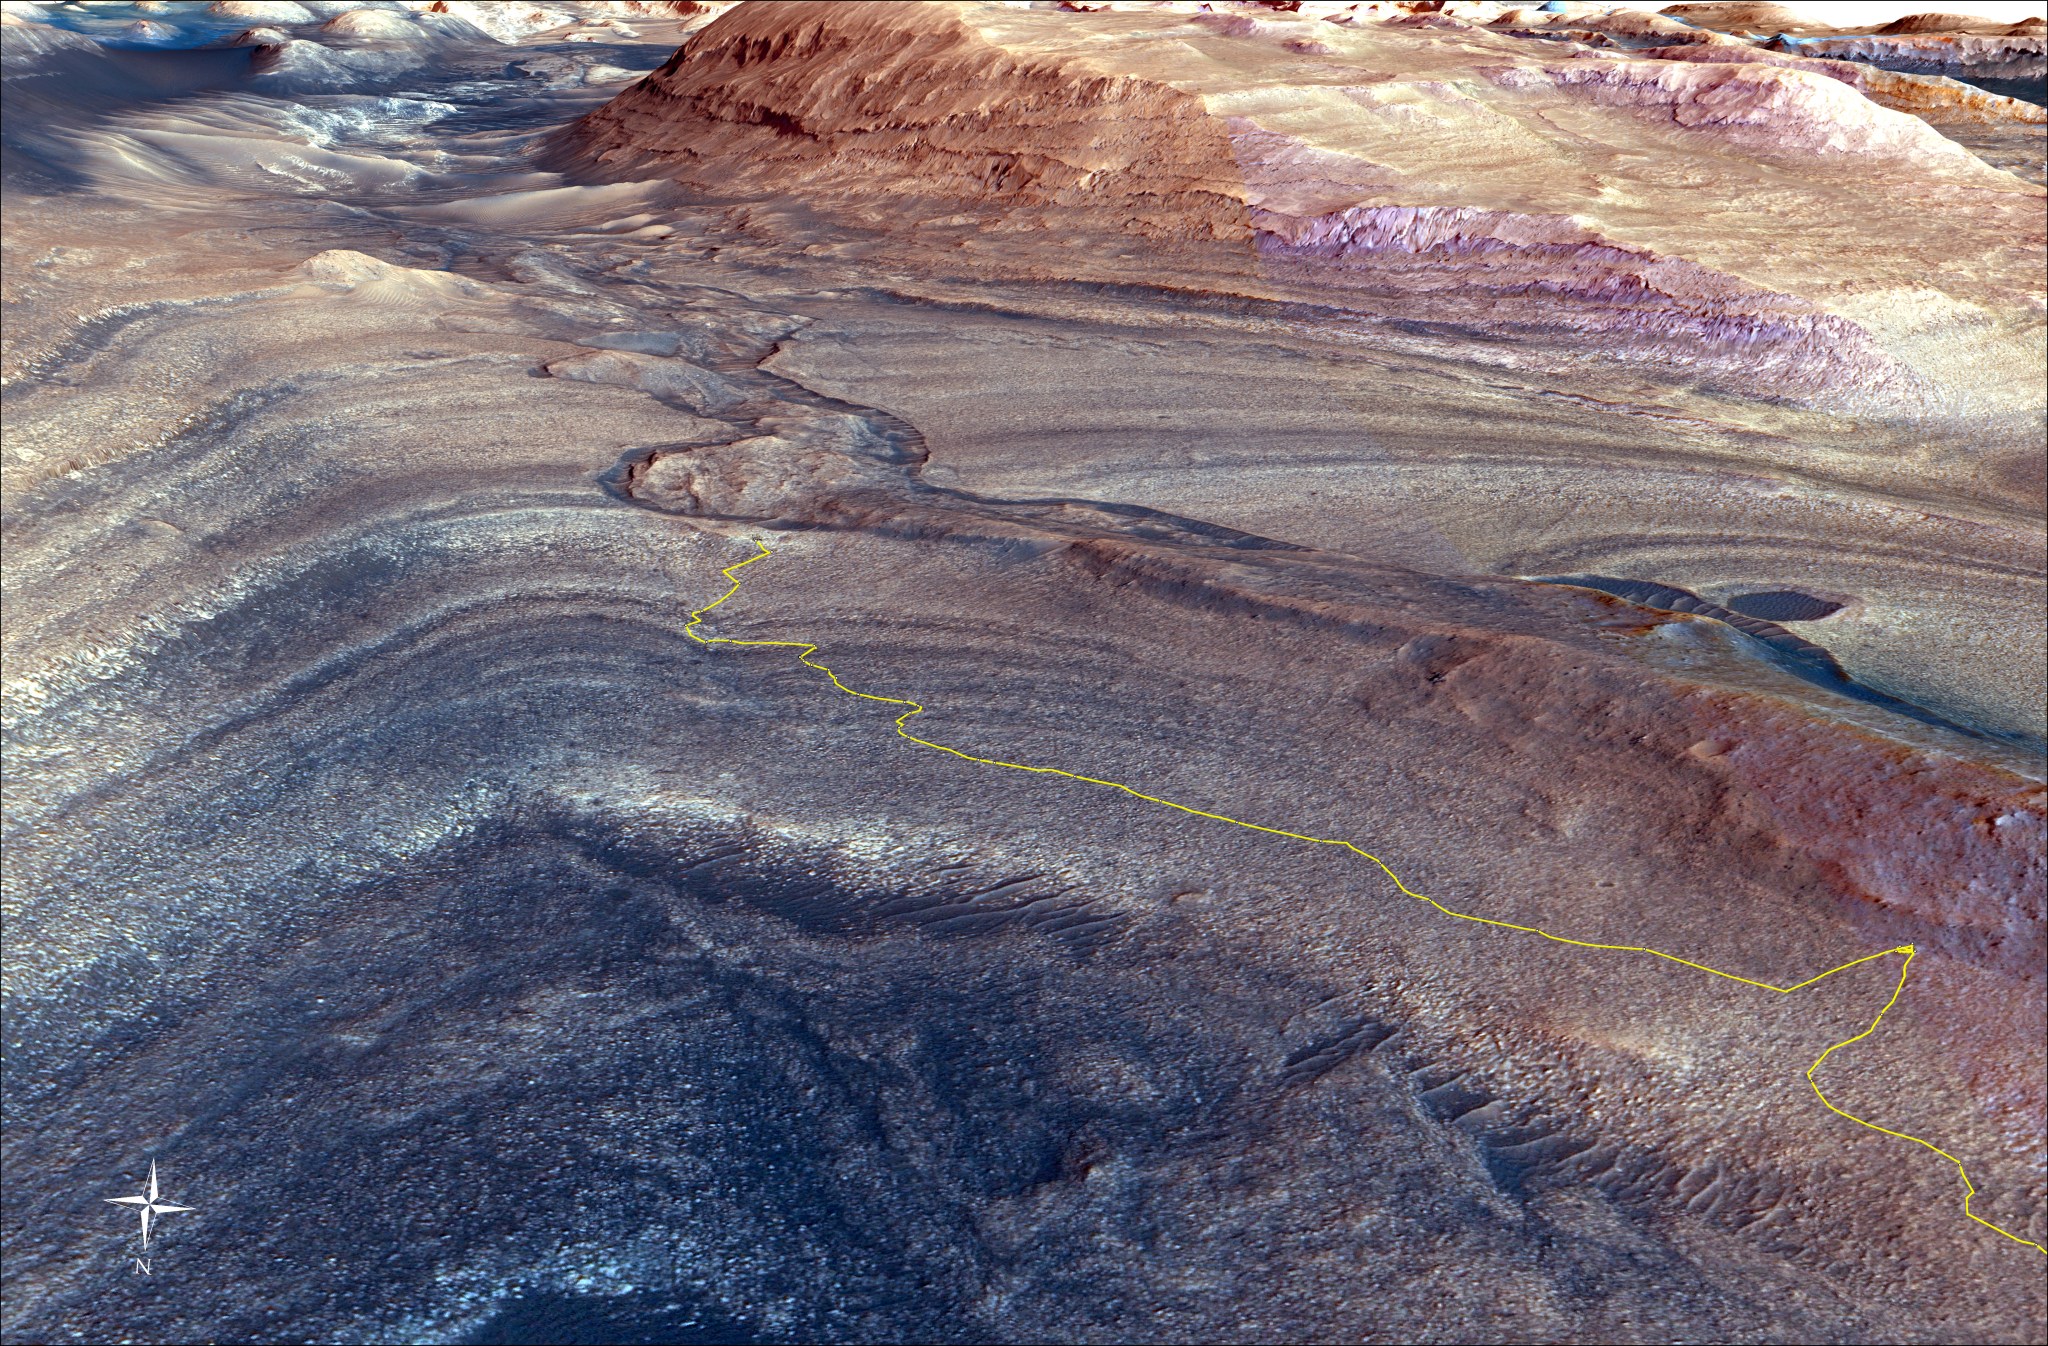 This rendering shows the area where NASA's Curiosity Mars rover climbed a steep slope to reach a location called Gediz Vallis channel